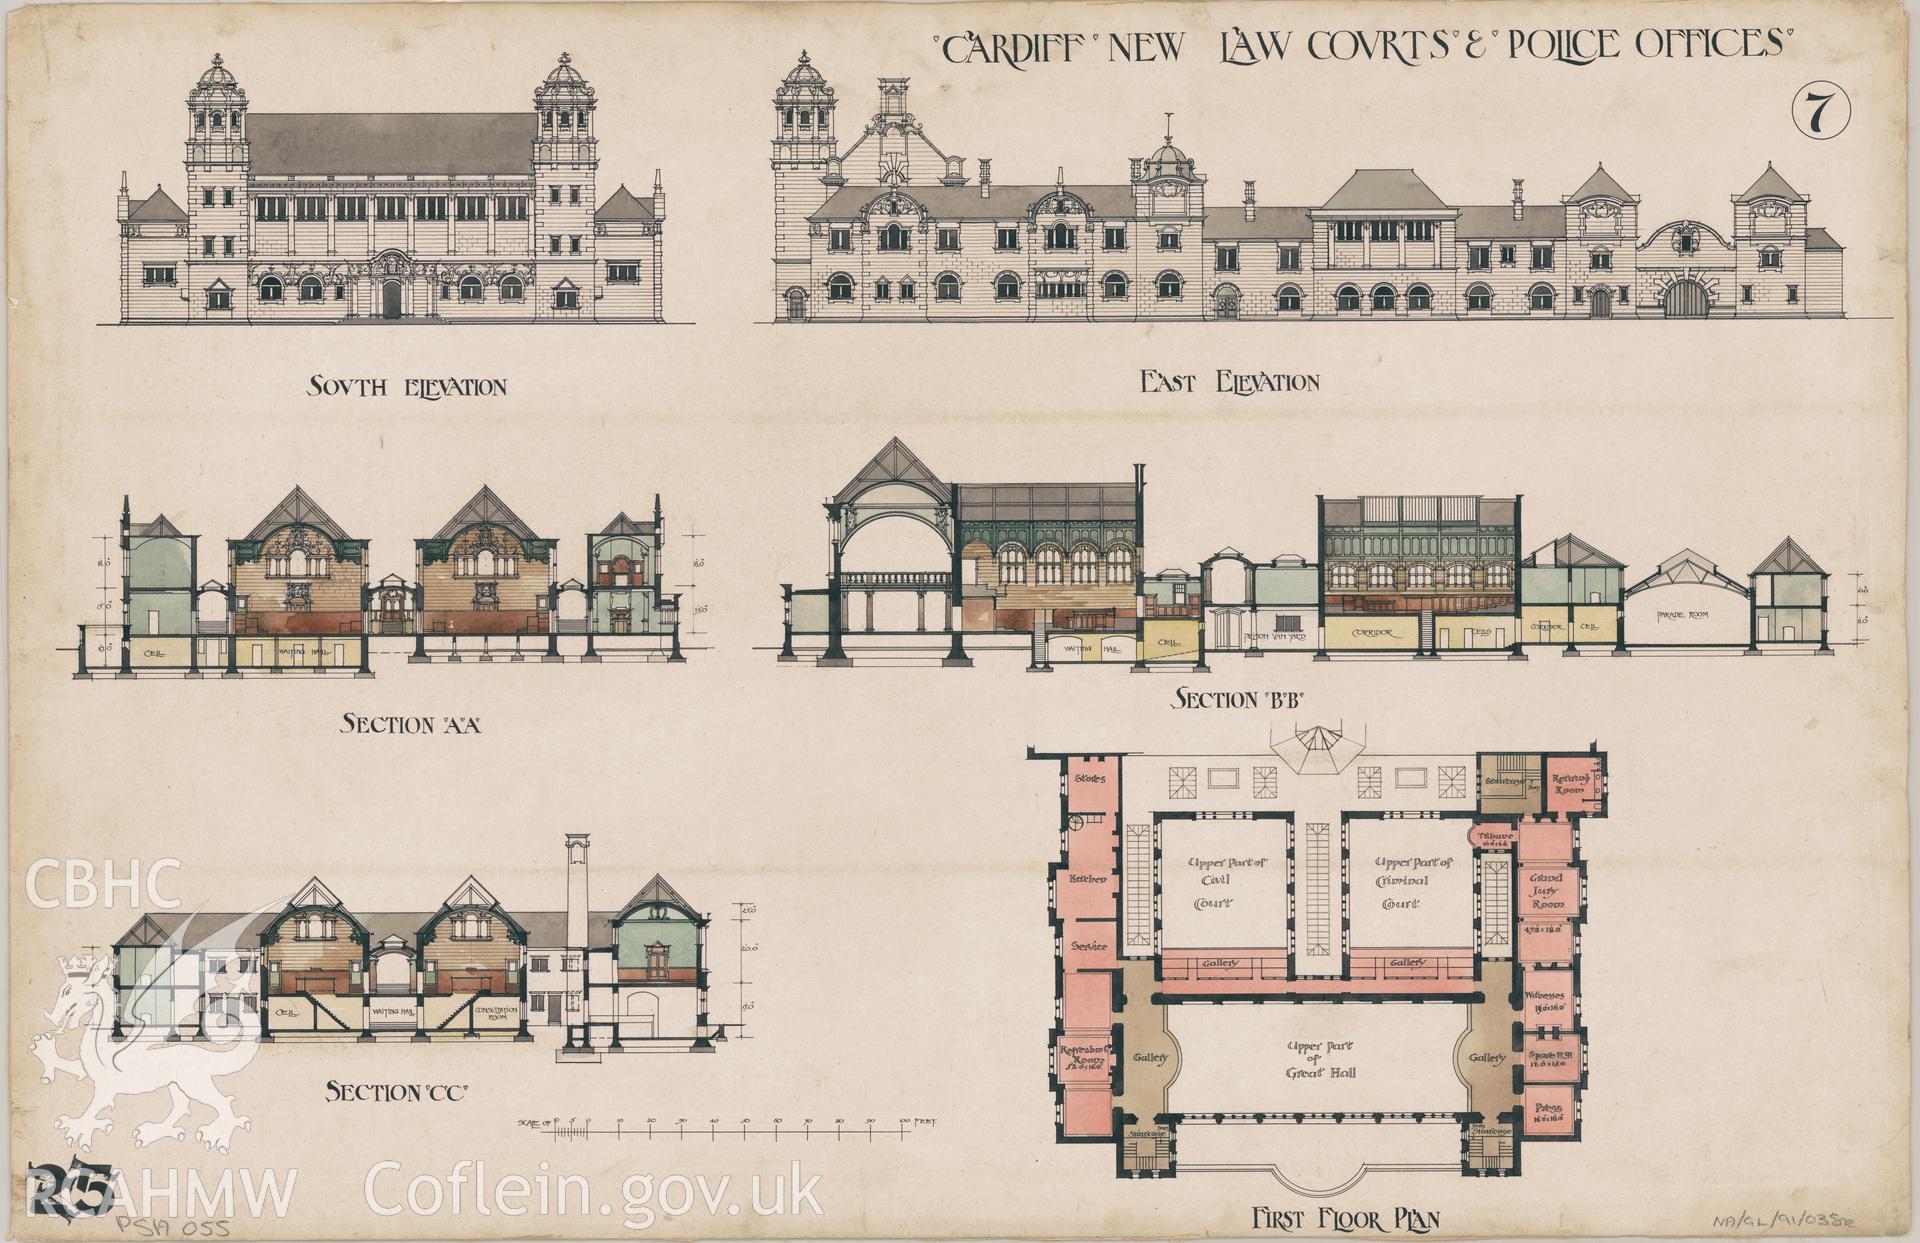 Law Court, Cathays Park, Cardiff; measured drawing showing proposed elevation views, section views and first floor plan, submitted as an entry in the 1897 competition to produce a design for the new Law Court.